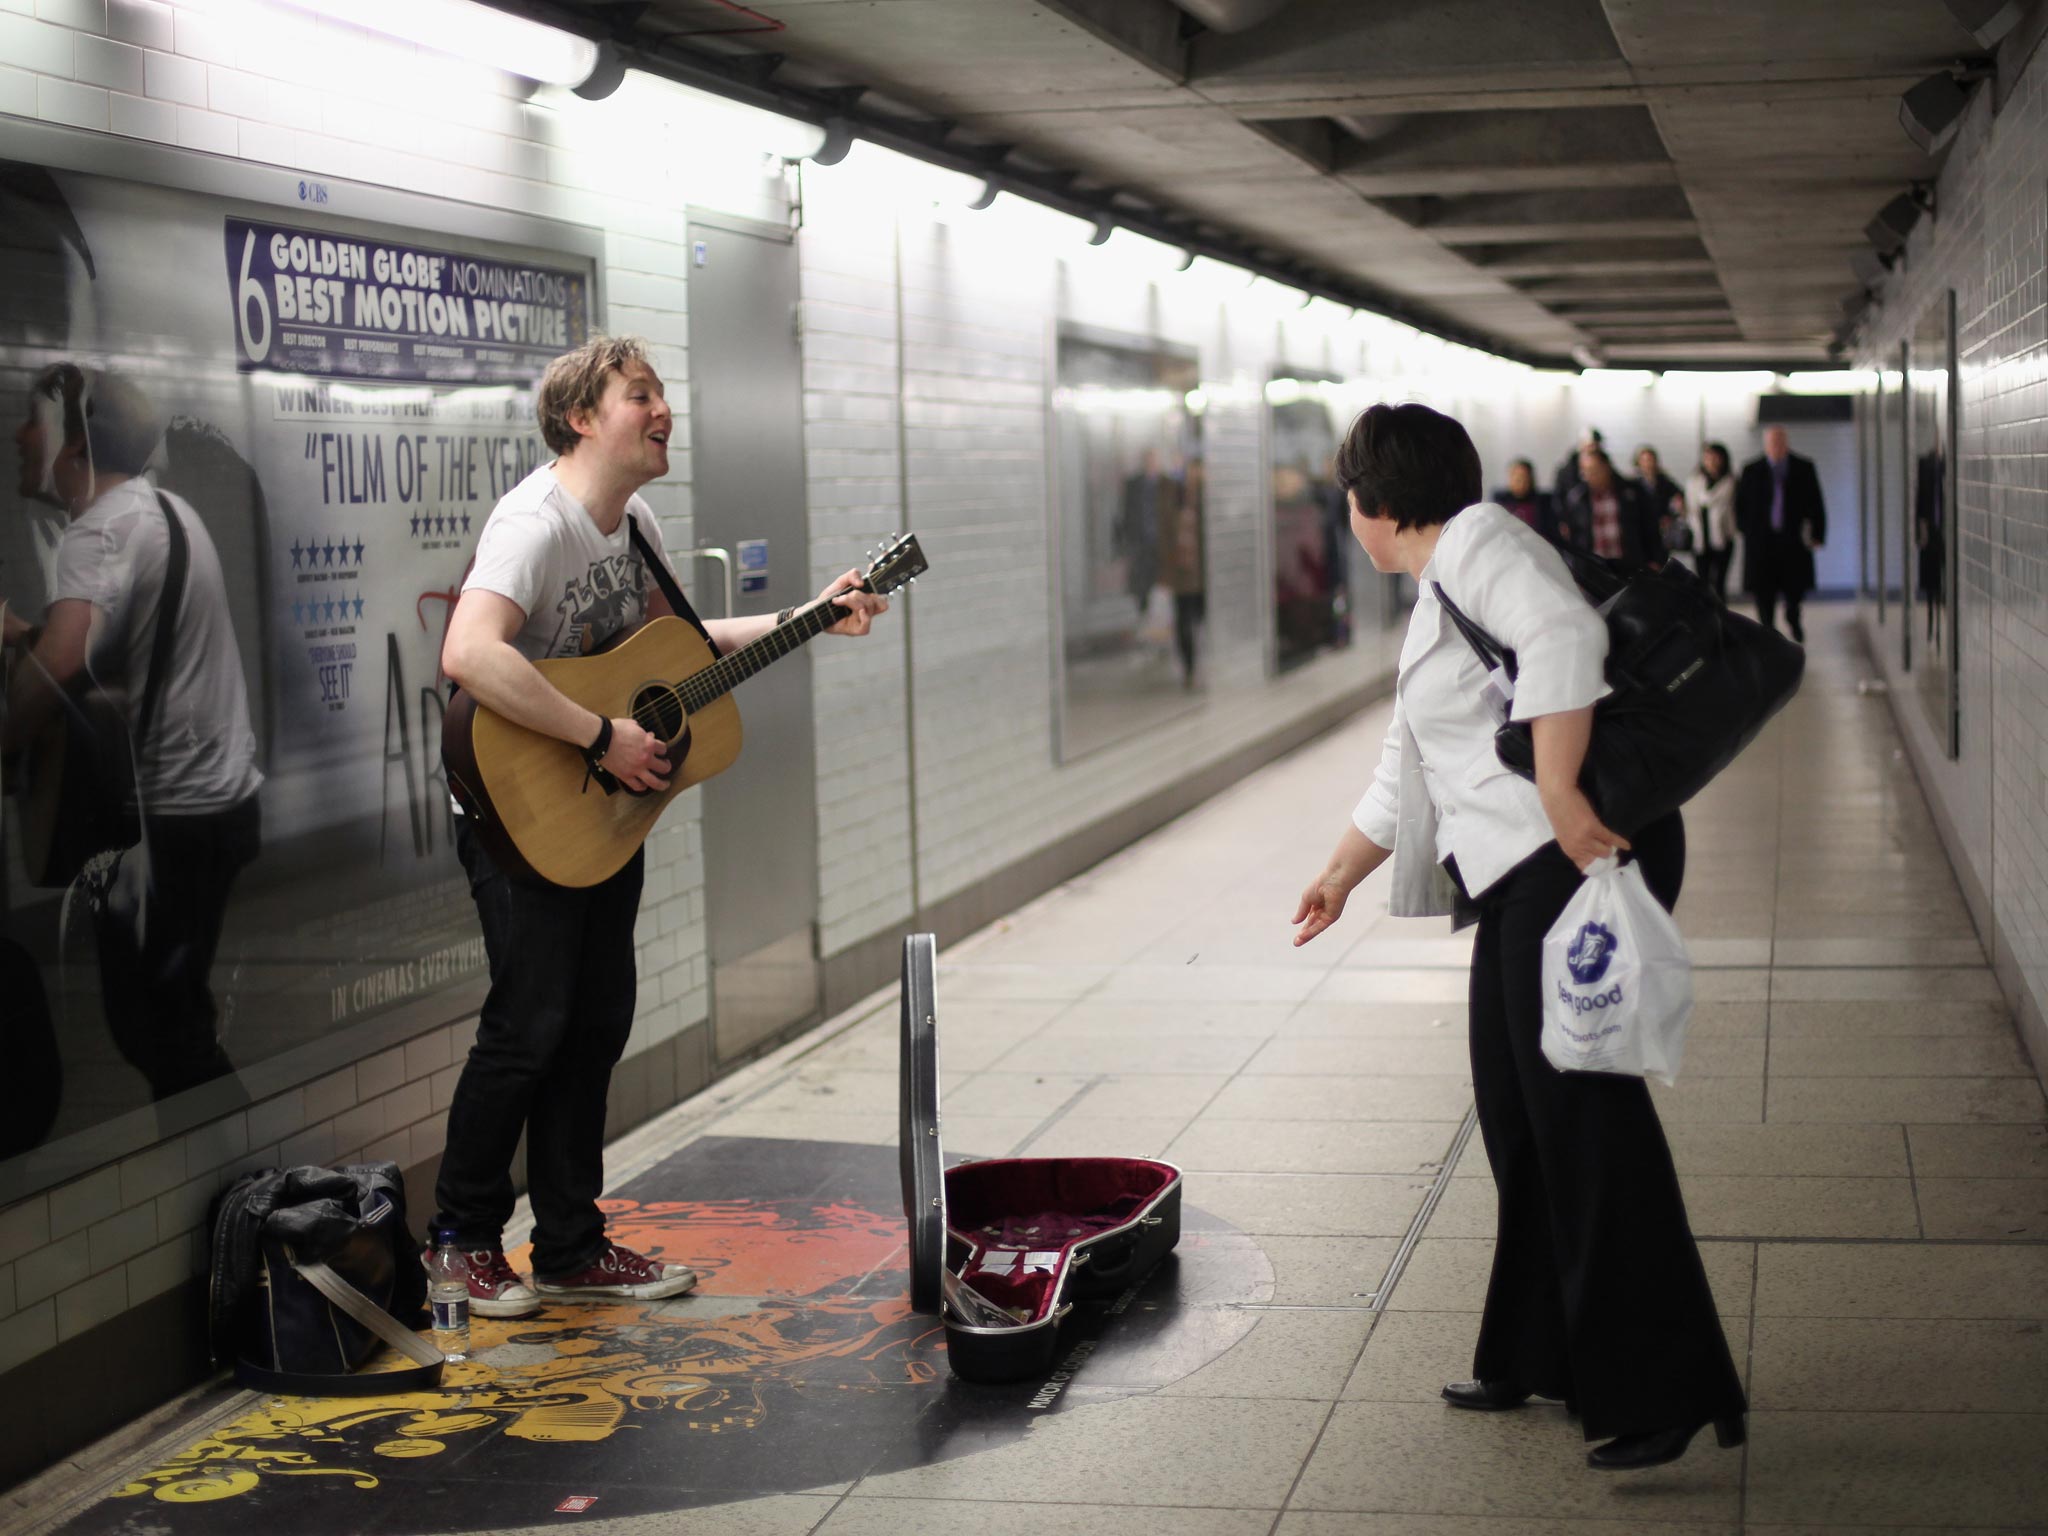 Official busking guidelines have been released to prevent confusion over performing on the capital’s streets